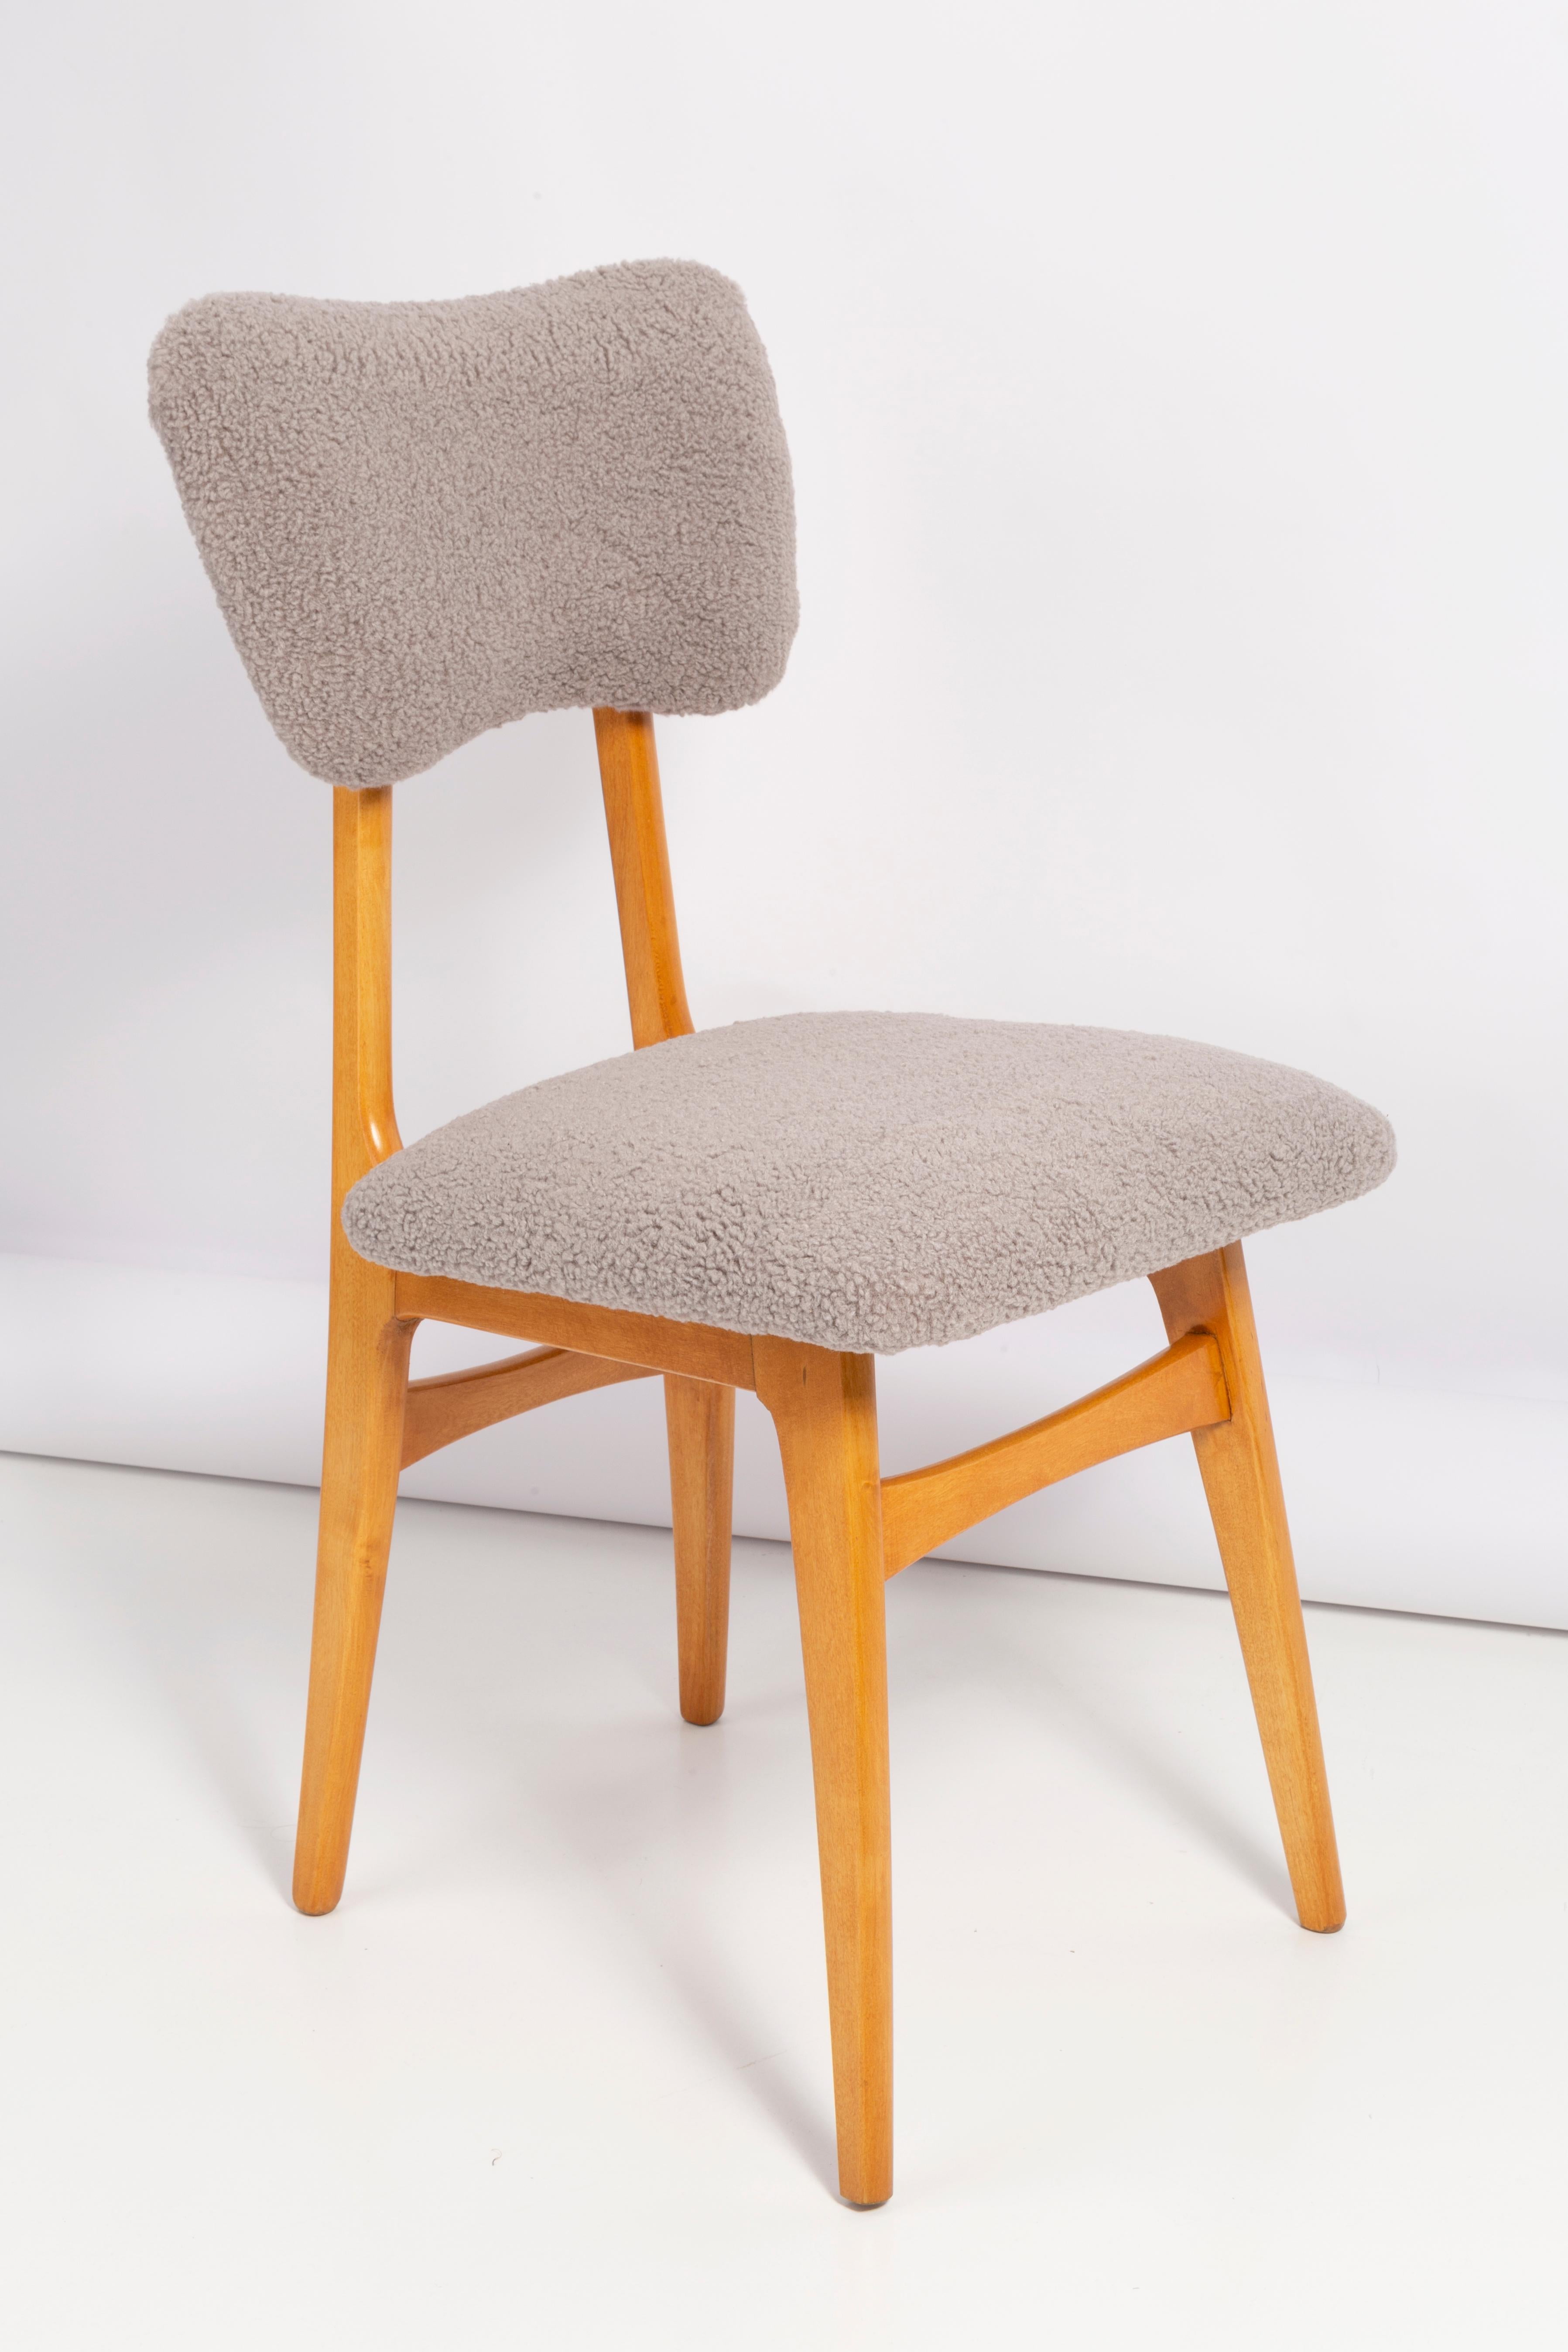 Chairs designed by Prof. Rajmund Halas. Made of beechwood. Chairs are after a complete upholstery renovation, the woodwork has been refreshed. Seat and back is dressed in gray, durable and pleasant to the touch boucle fabric. Chairs are stable and